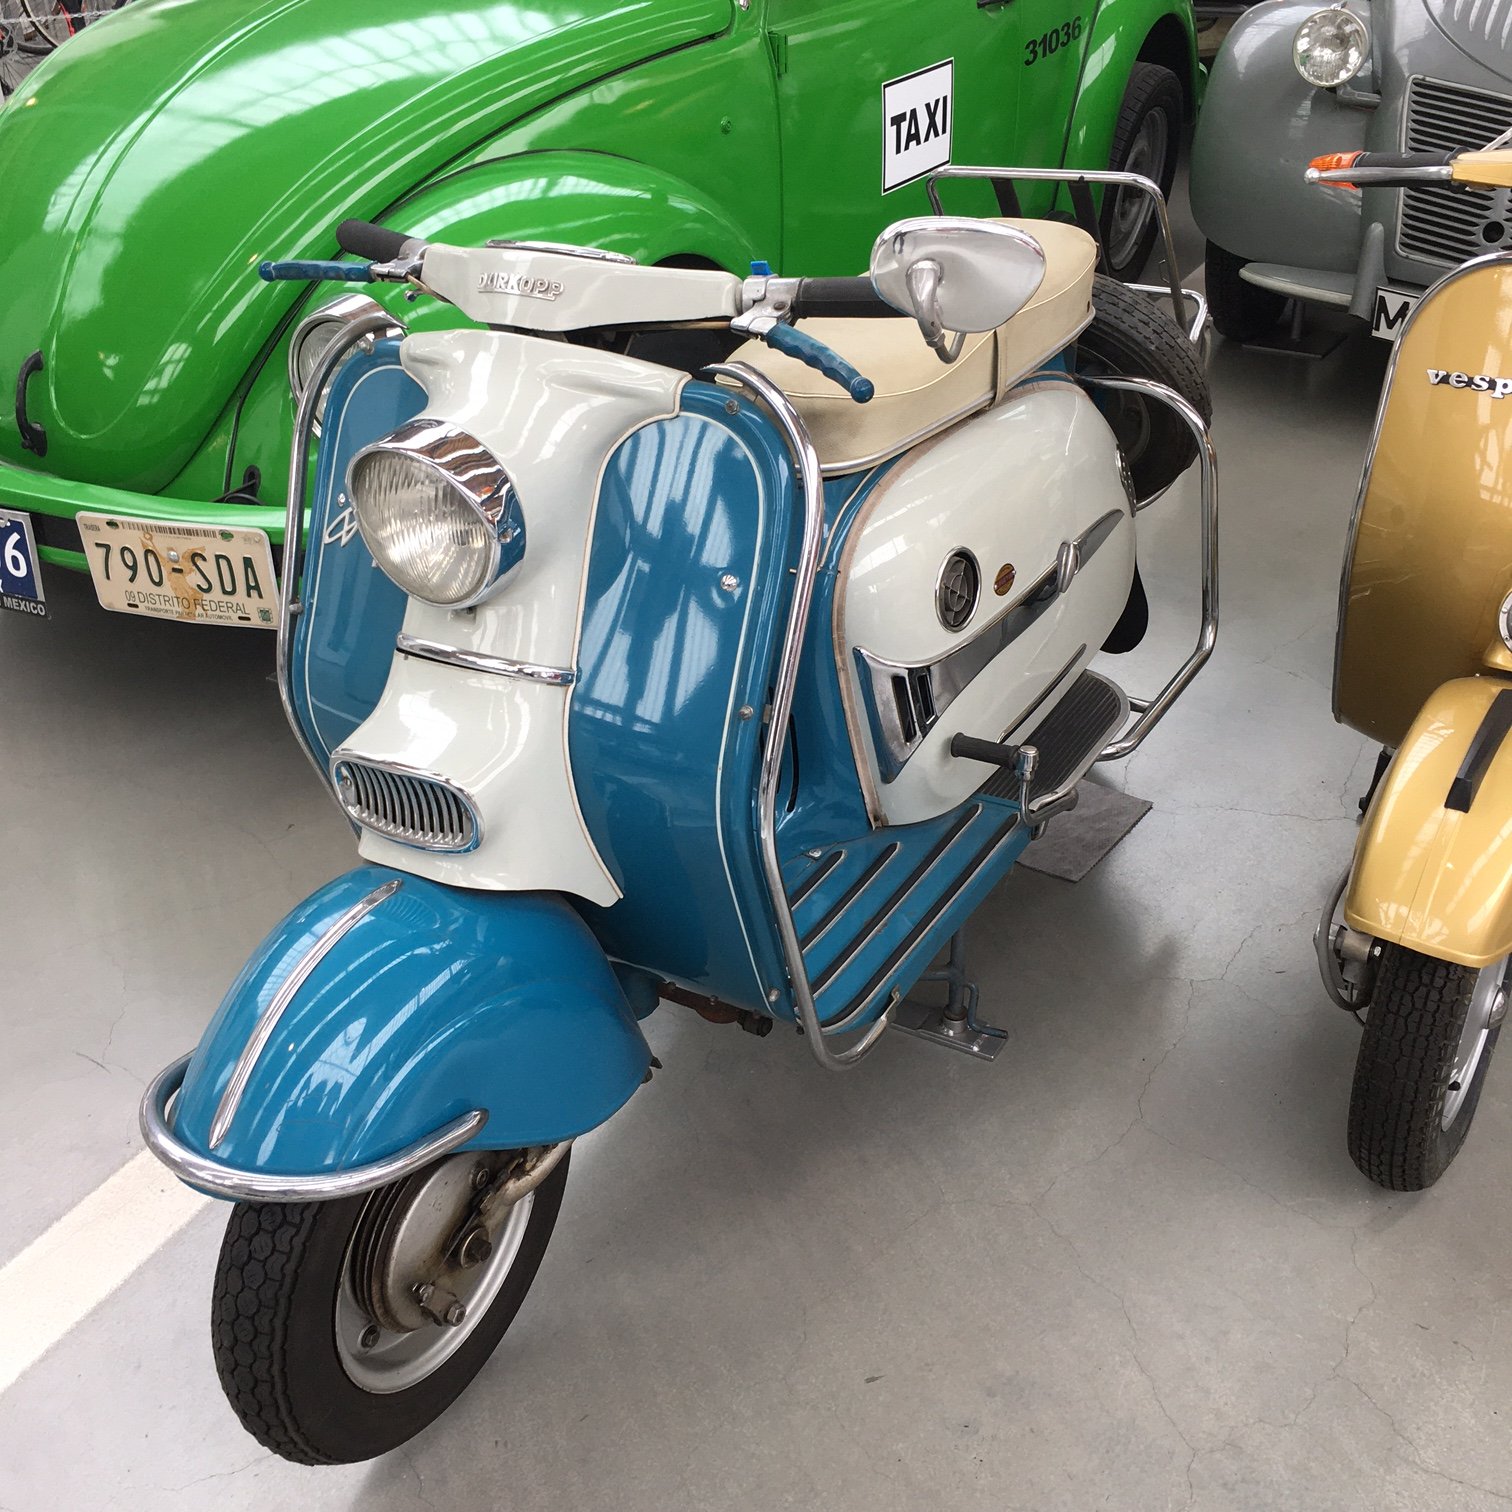 Deutsches Museum on Twitter: "Blue scooter on #BlueMonday: This motor scooter TS 175“ from Dürkopp one of the larger scooters of the 1950s. With over 30,000 units sold, the